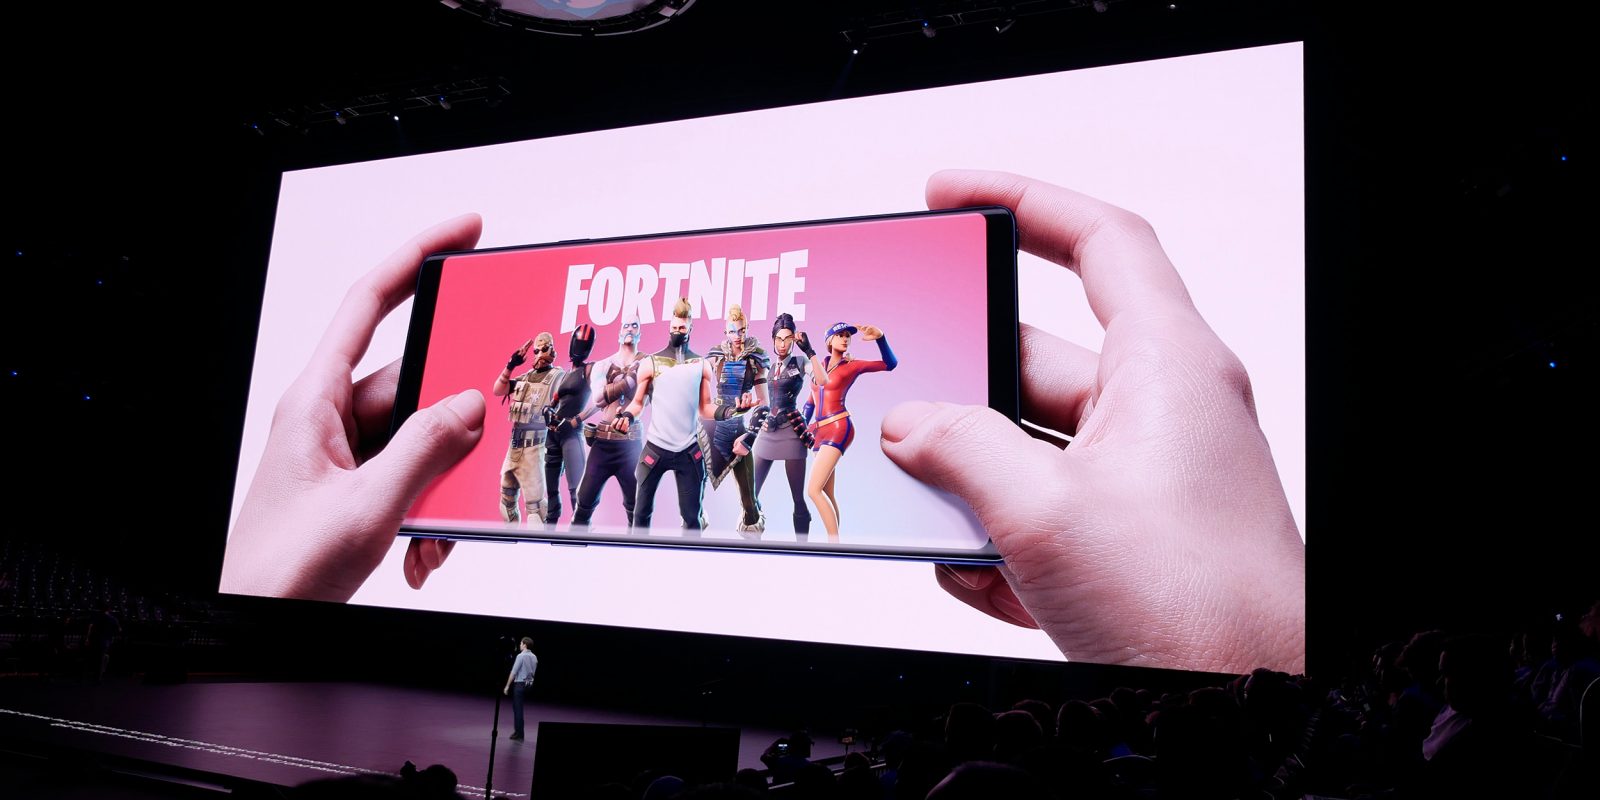 Fortnite For Android Now Available In Beta But Only For Samsung - fortnite for android now available in beta but only for samsung devices for 3 days